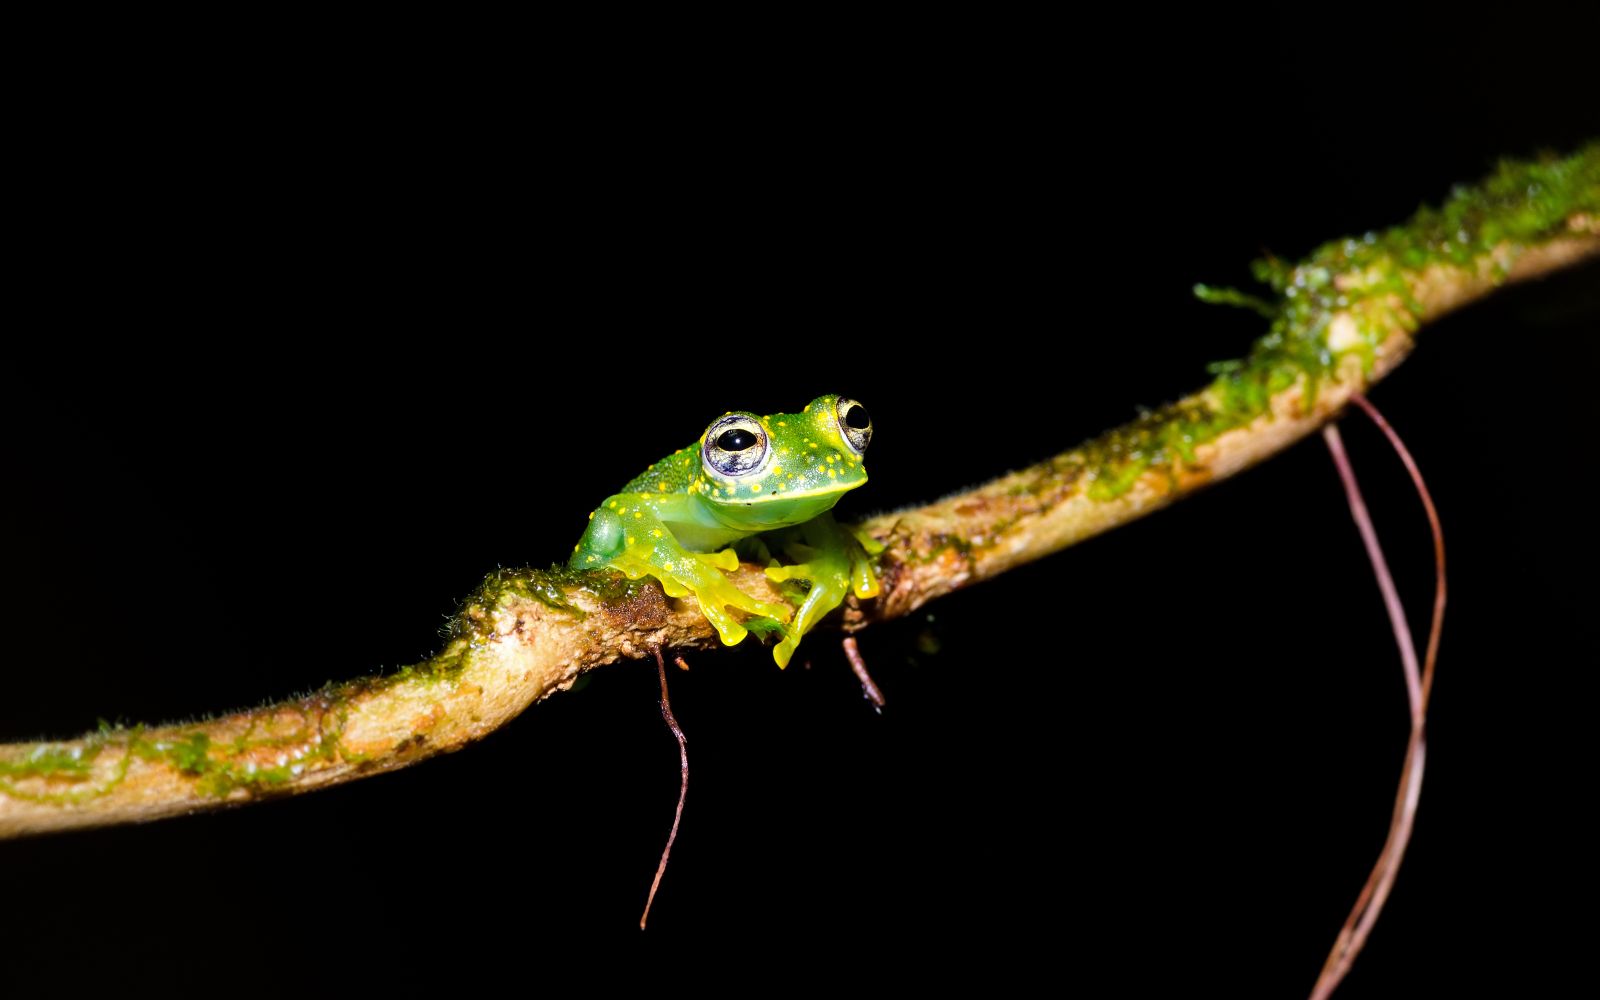 A jungle frog by night